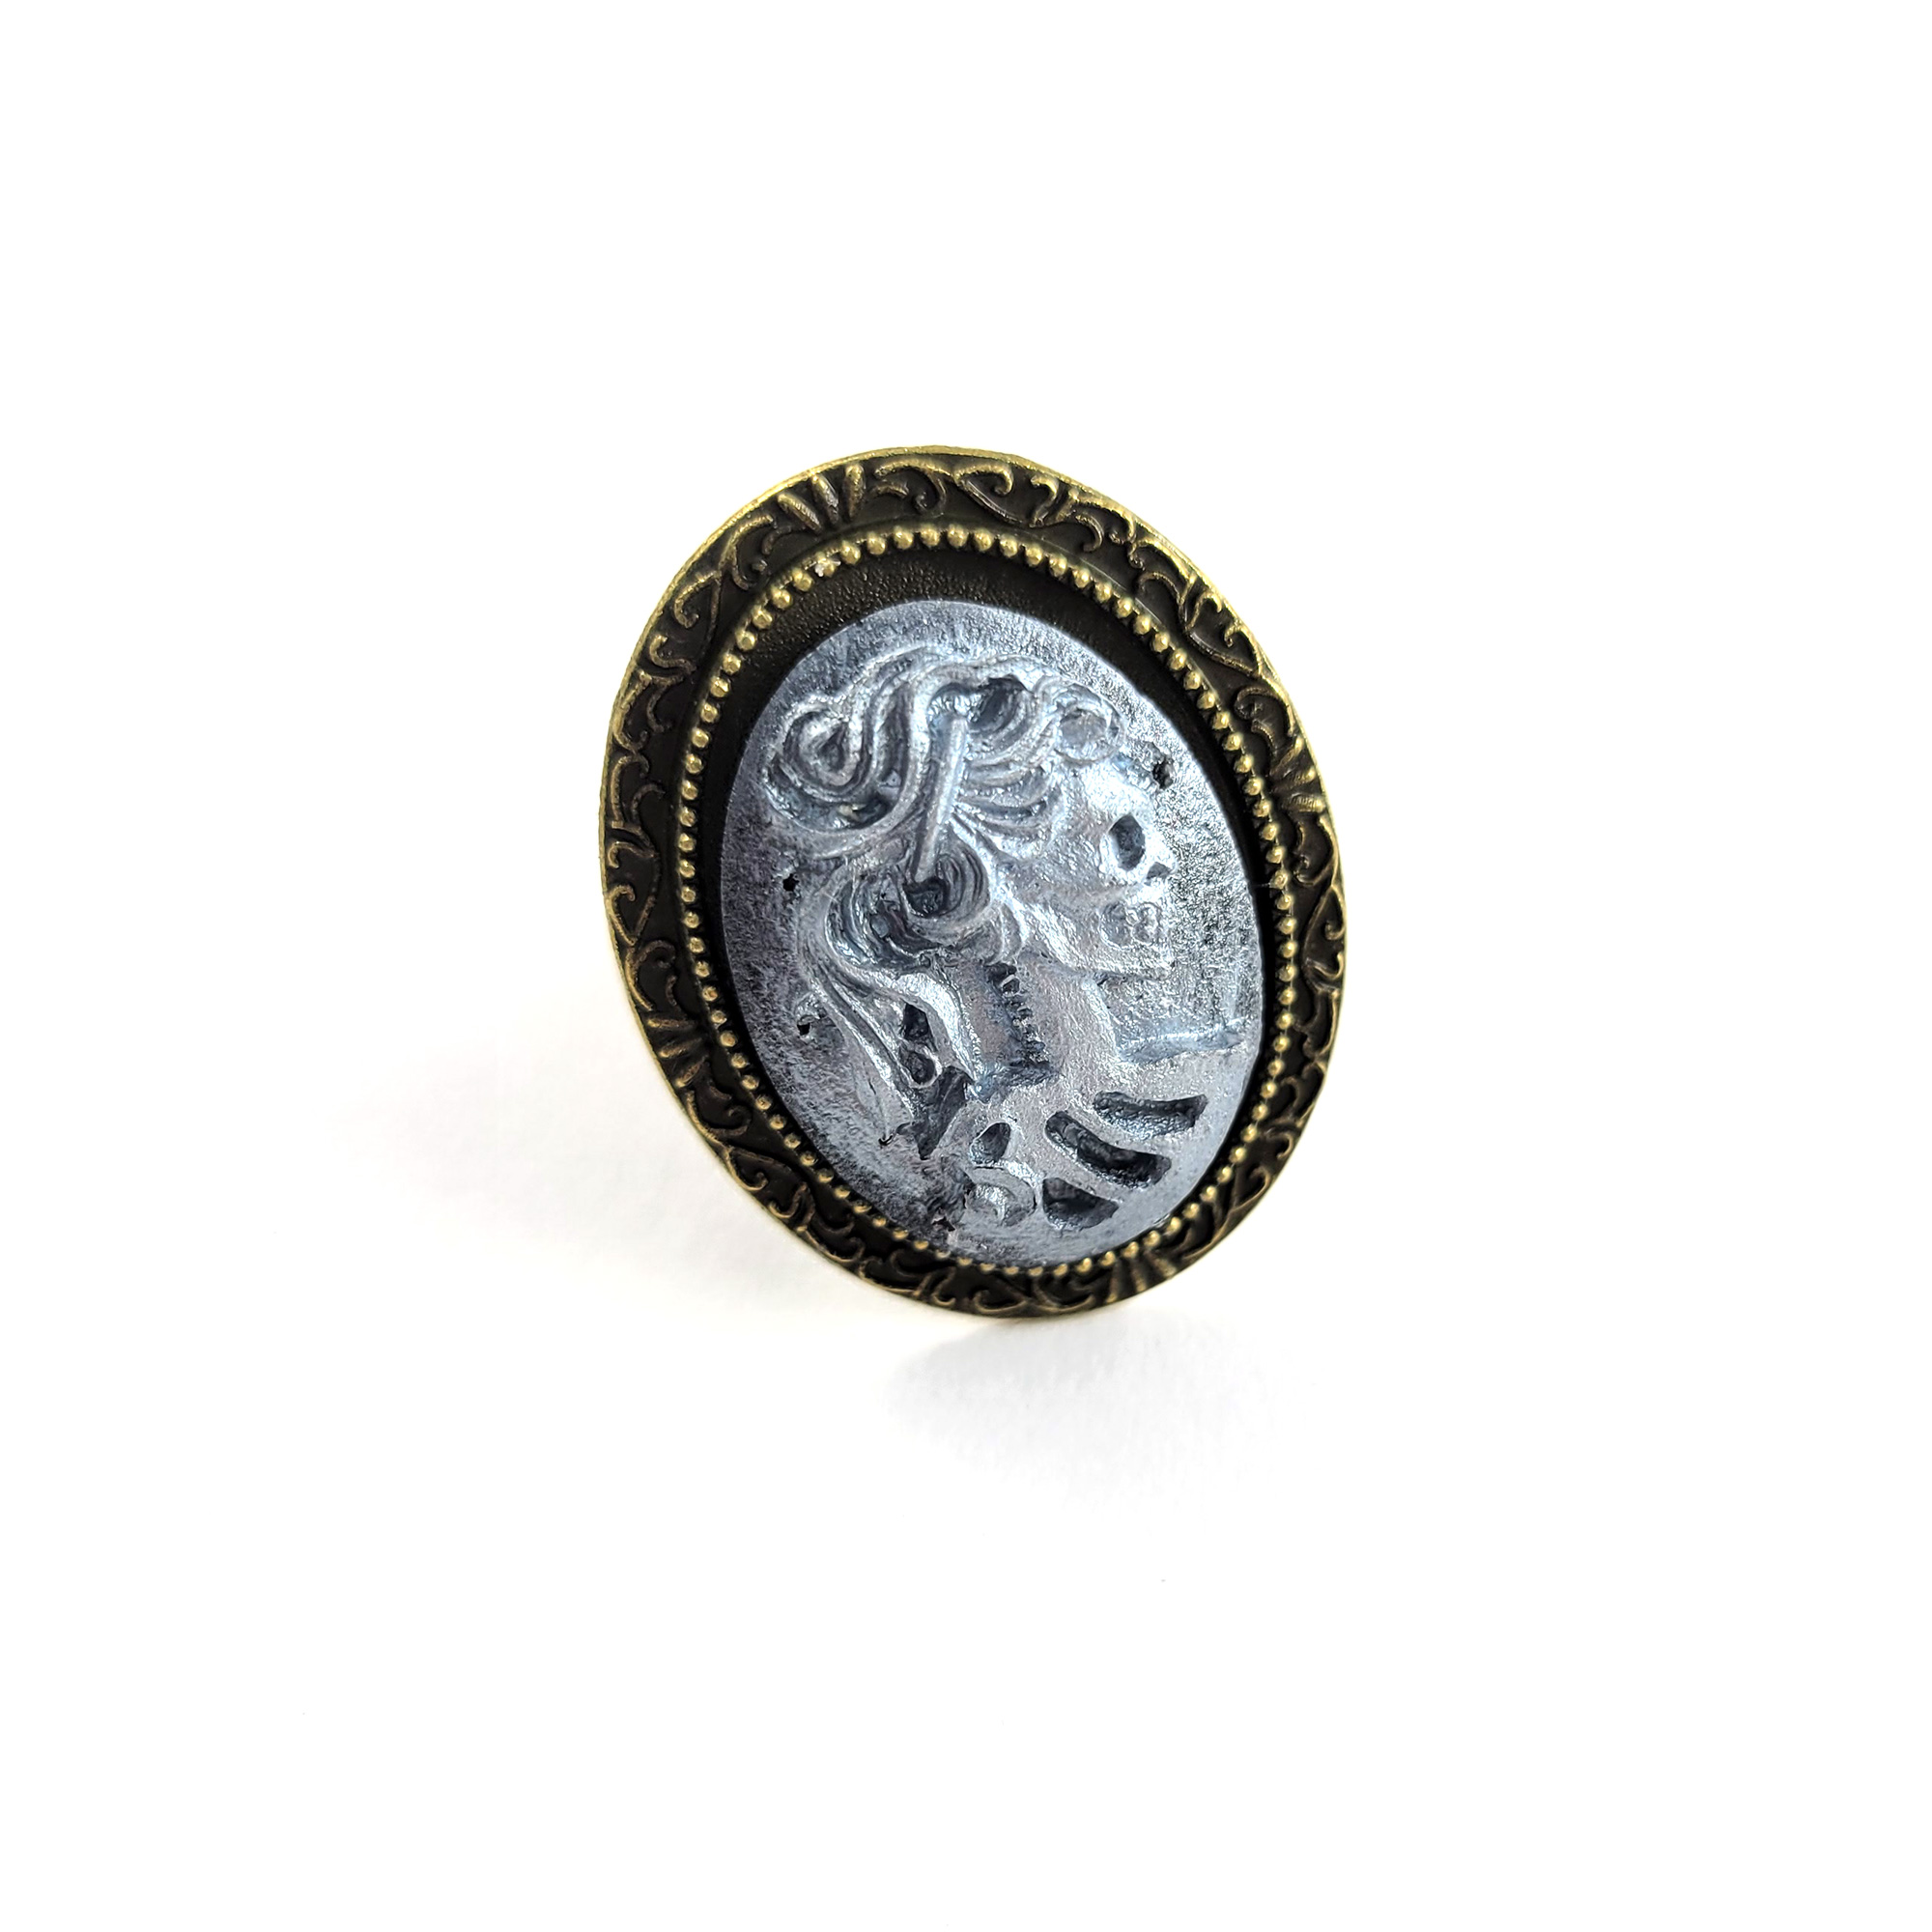 Portrait of a Skeletal Lady Cameo Ring in Silver by Wilde Designs